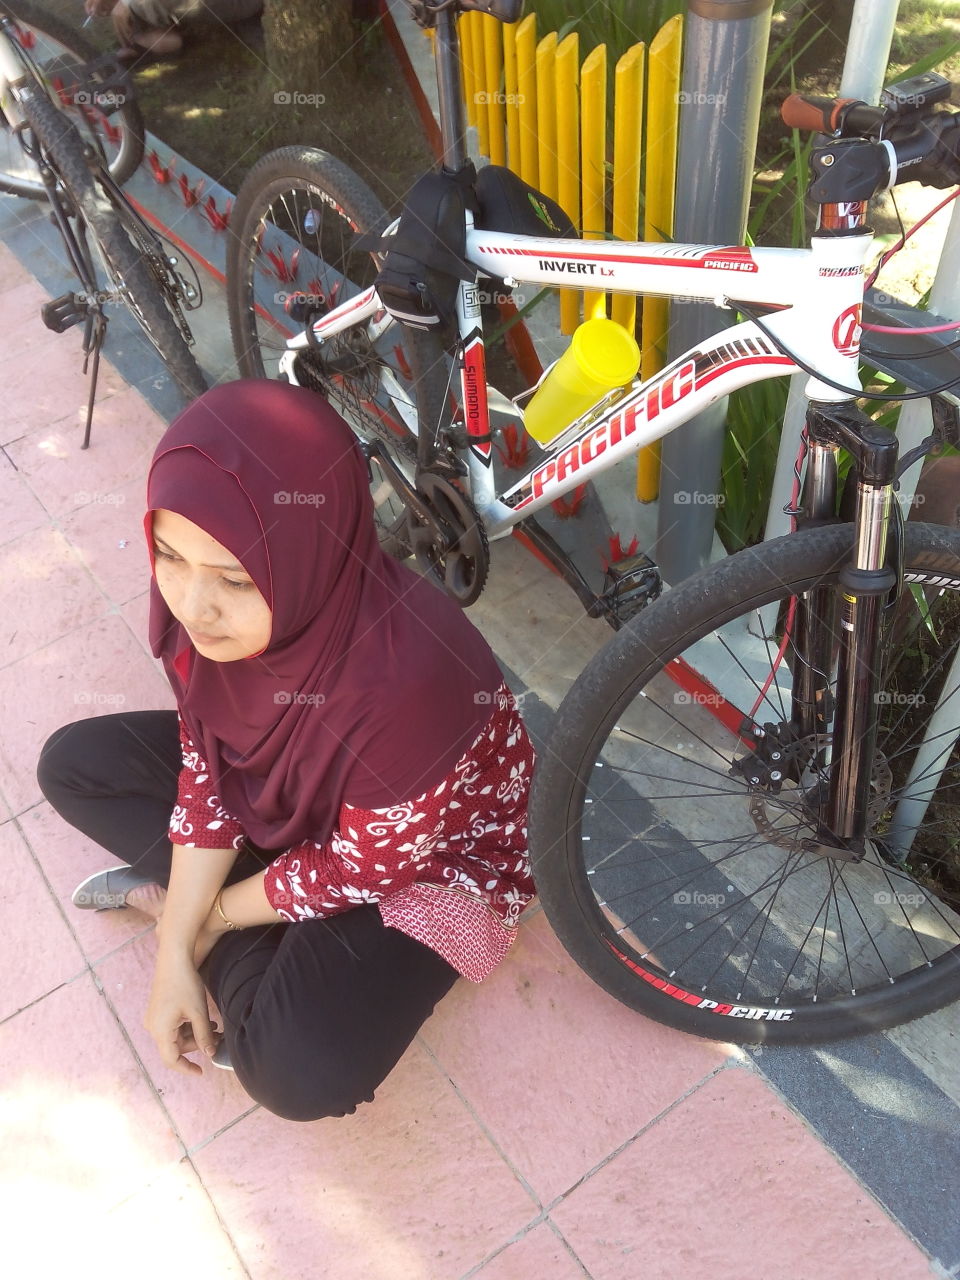 muslimah biker. my wife and her bicycle